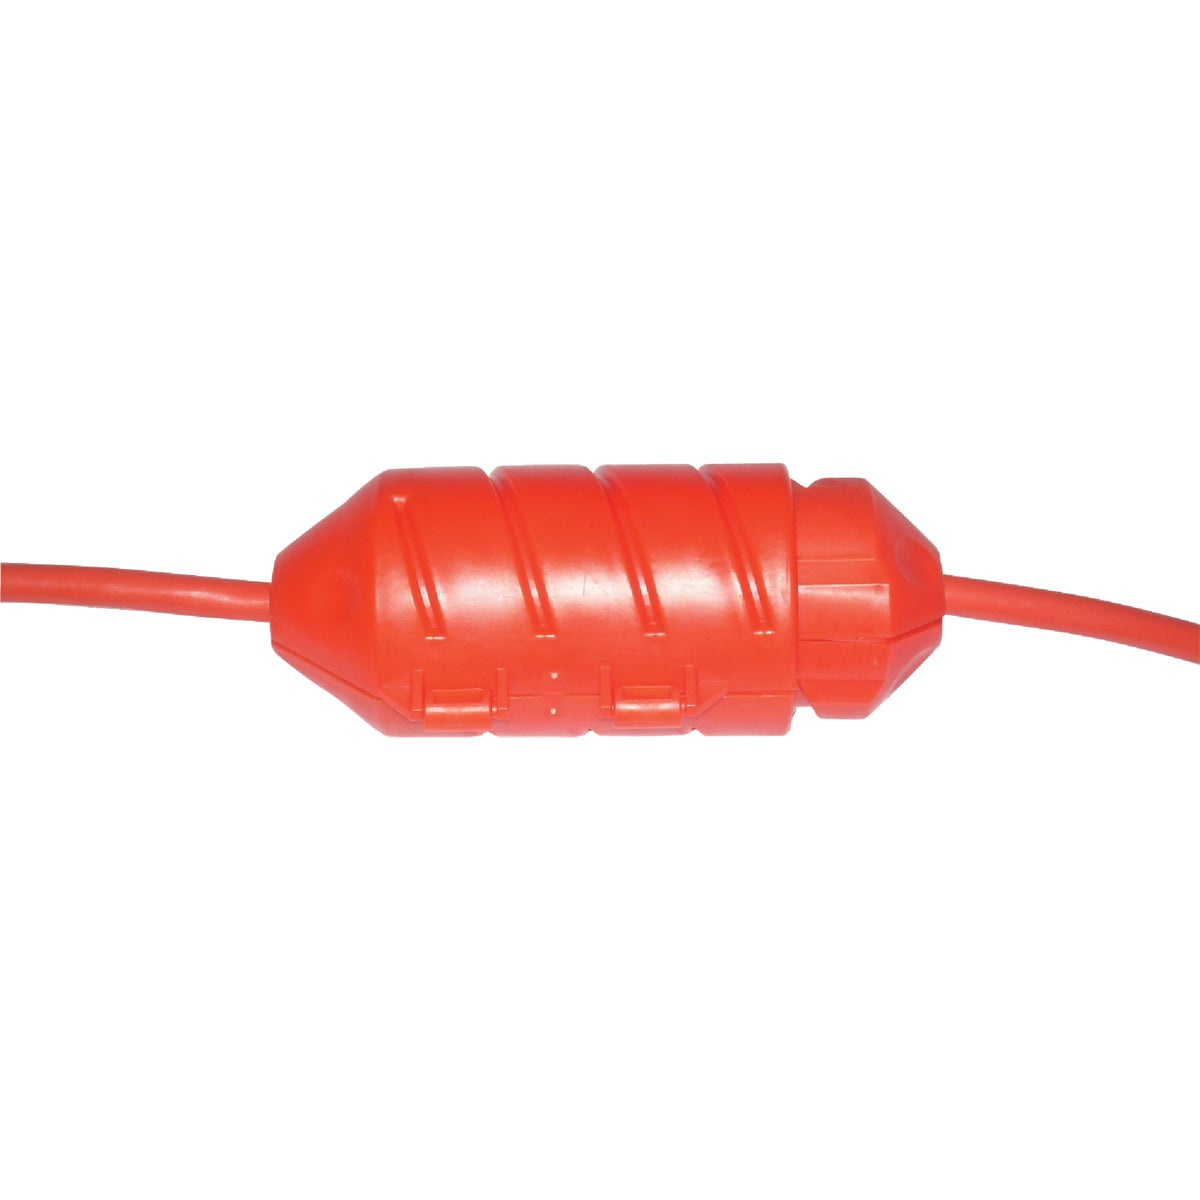 Item 523771, Cord connector will provide a secure, water-tight connection for extension 